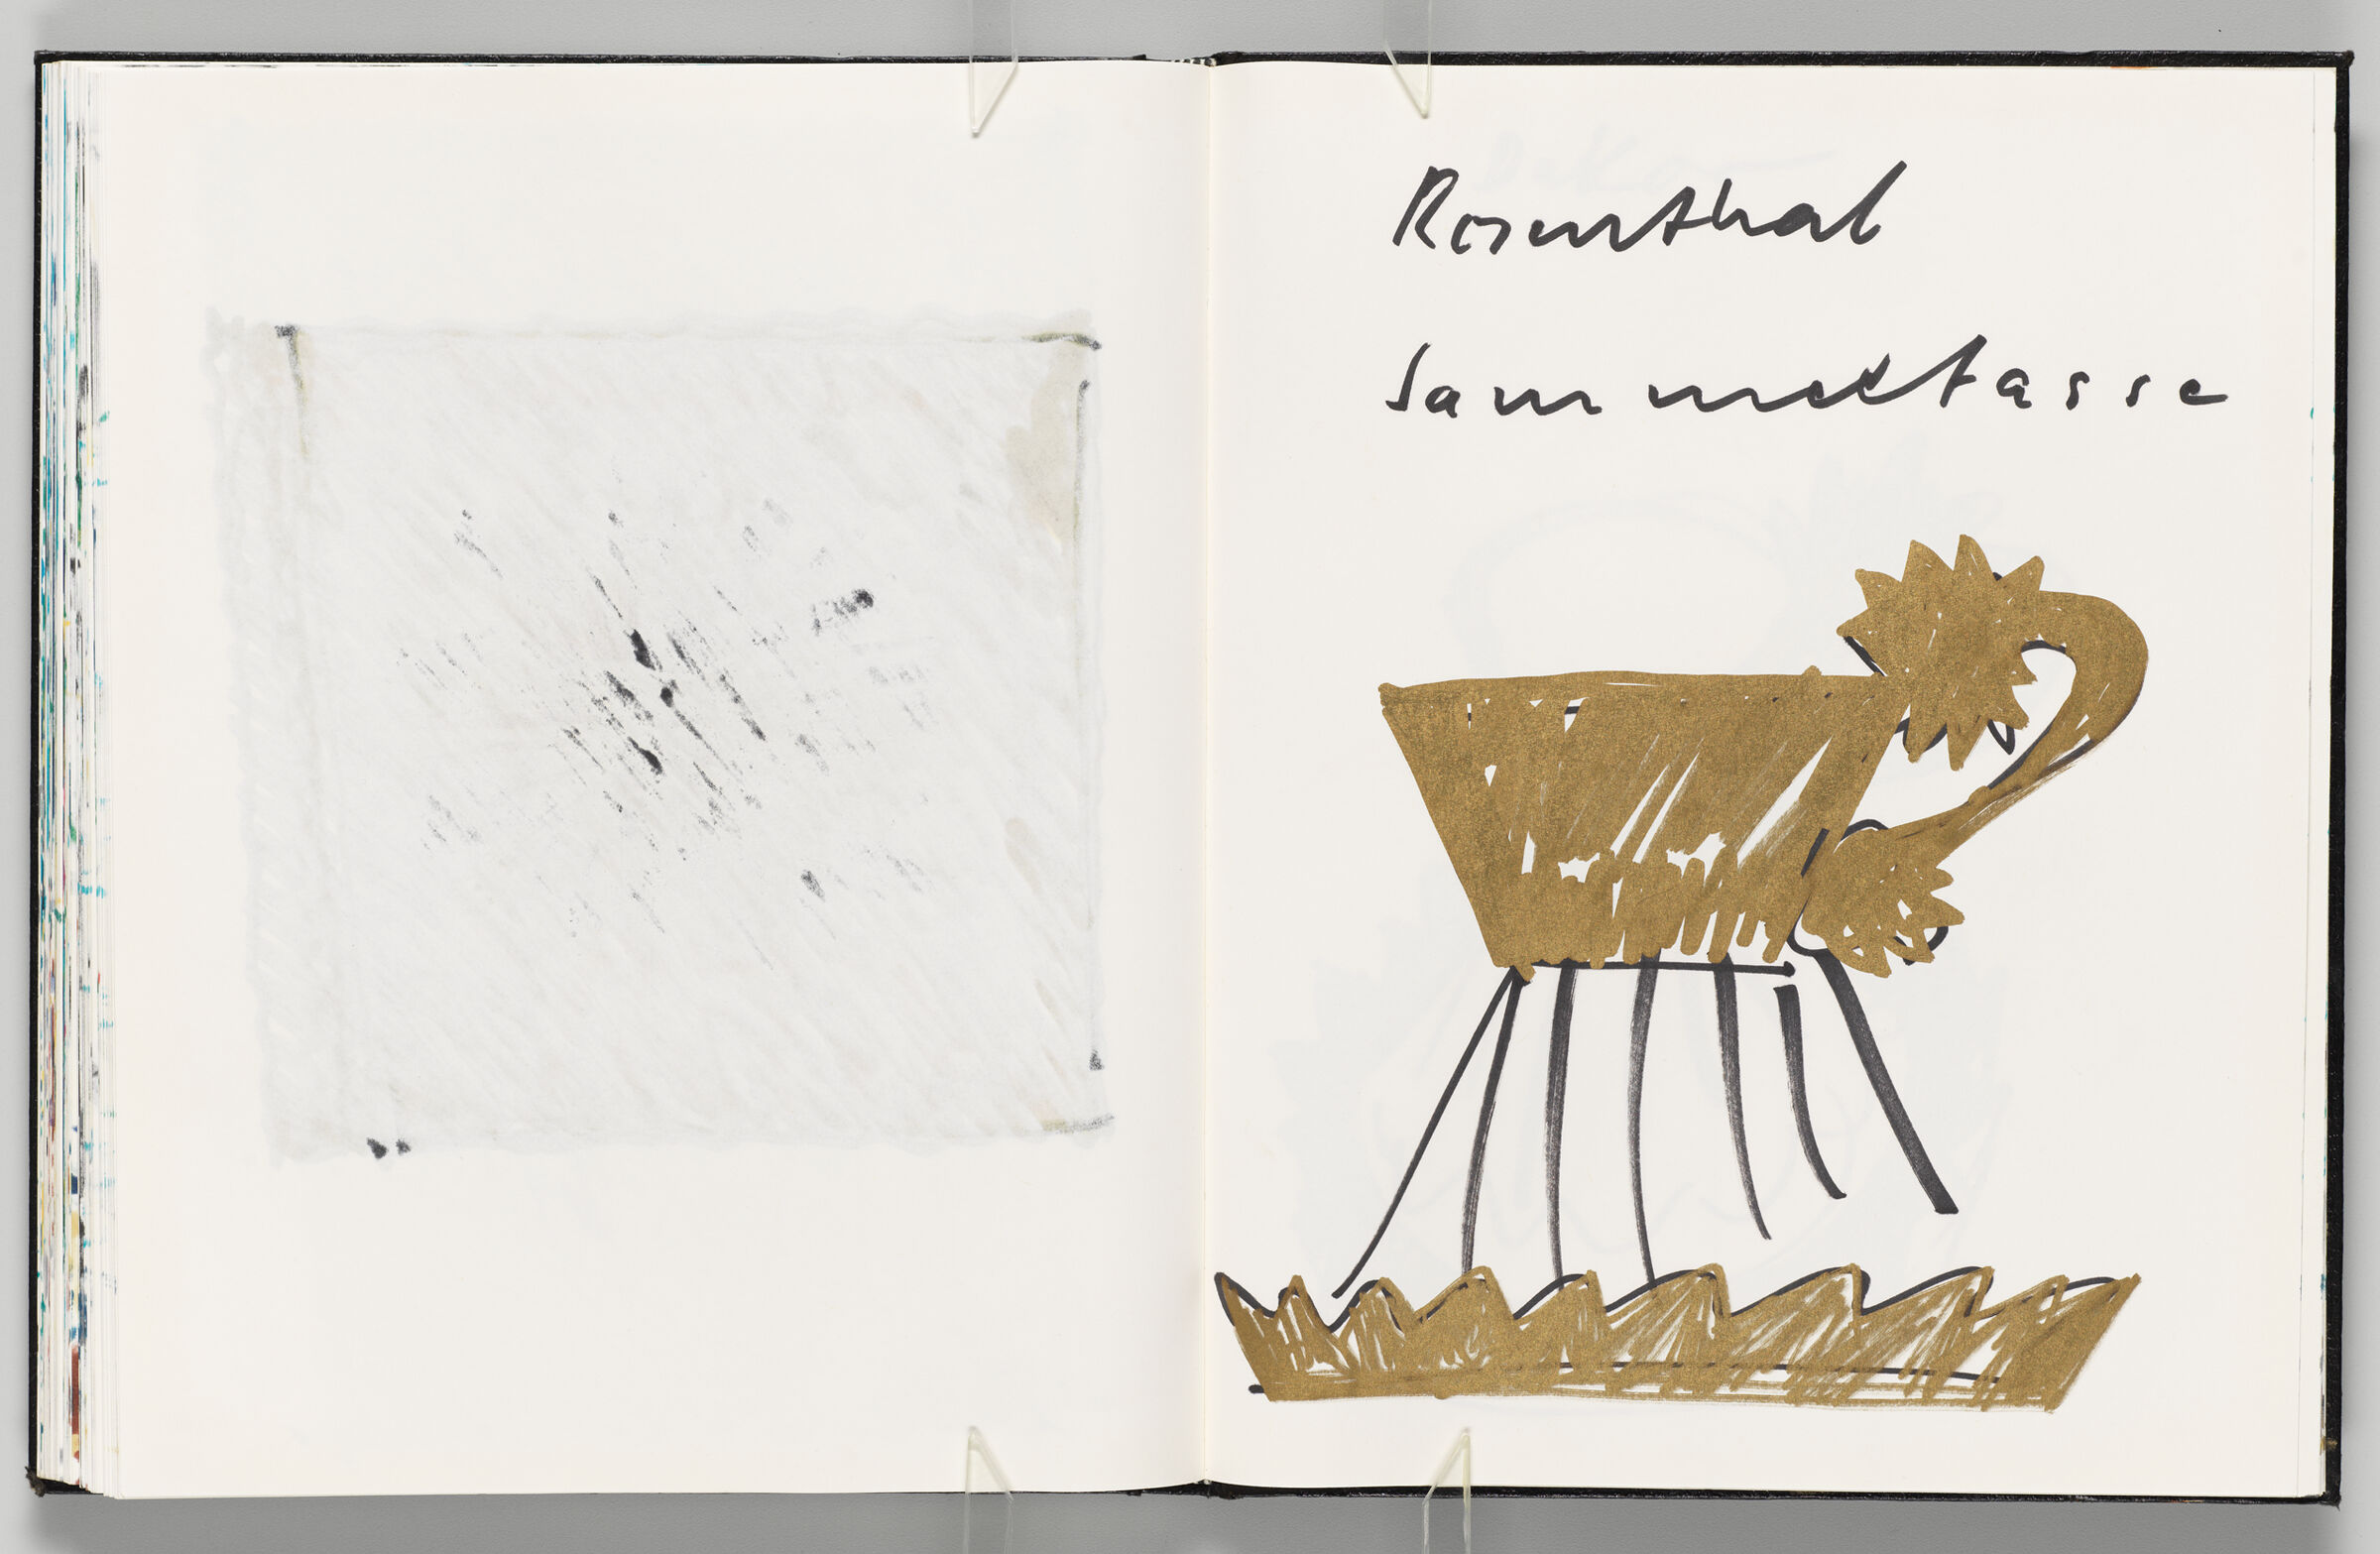 Untitled (Bleed-Through Of Previous Page, Left Page); Untitled (Design For Rosenthal Collector's Cup, Right Page)